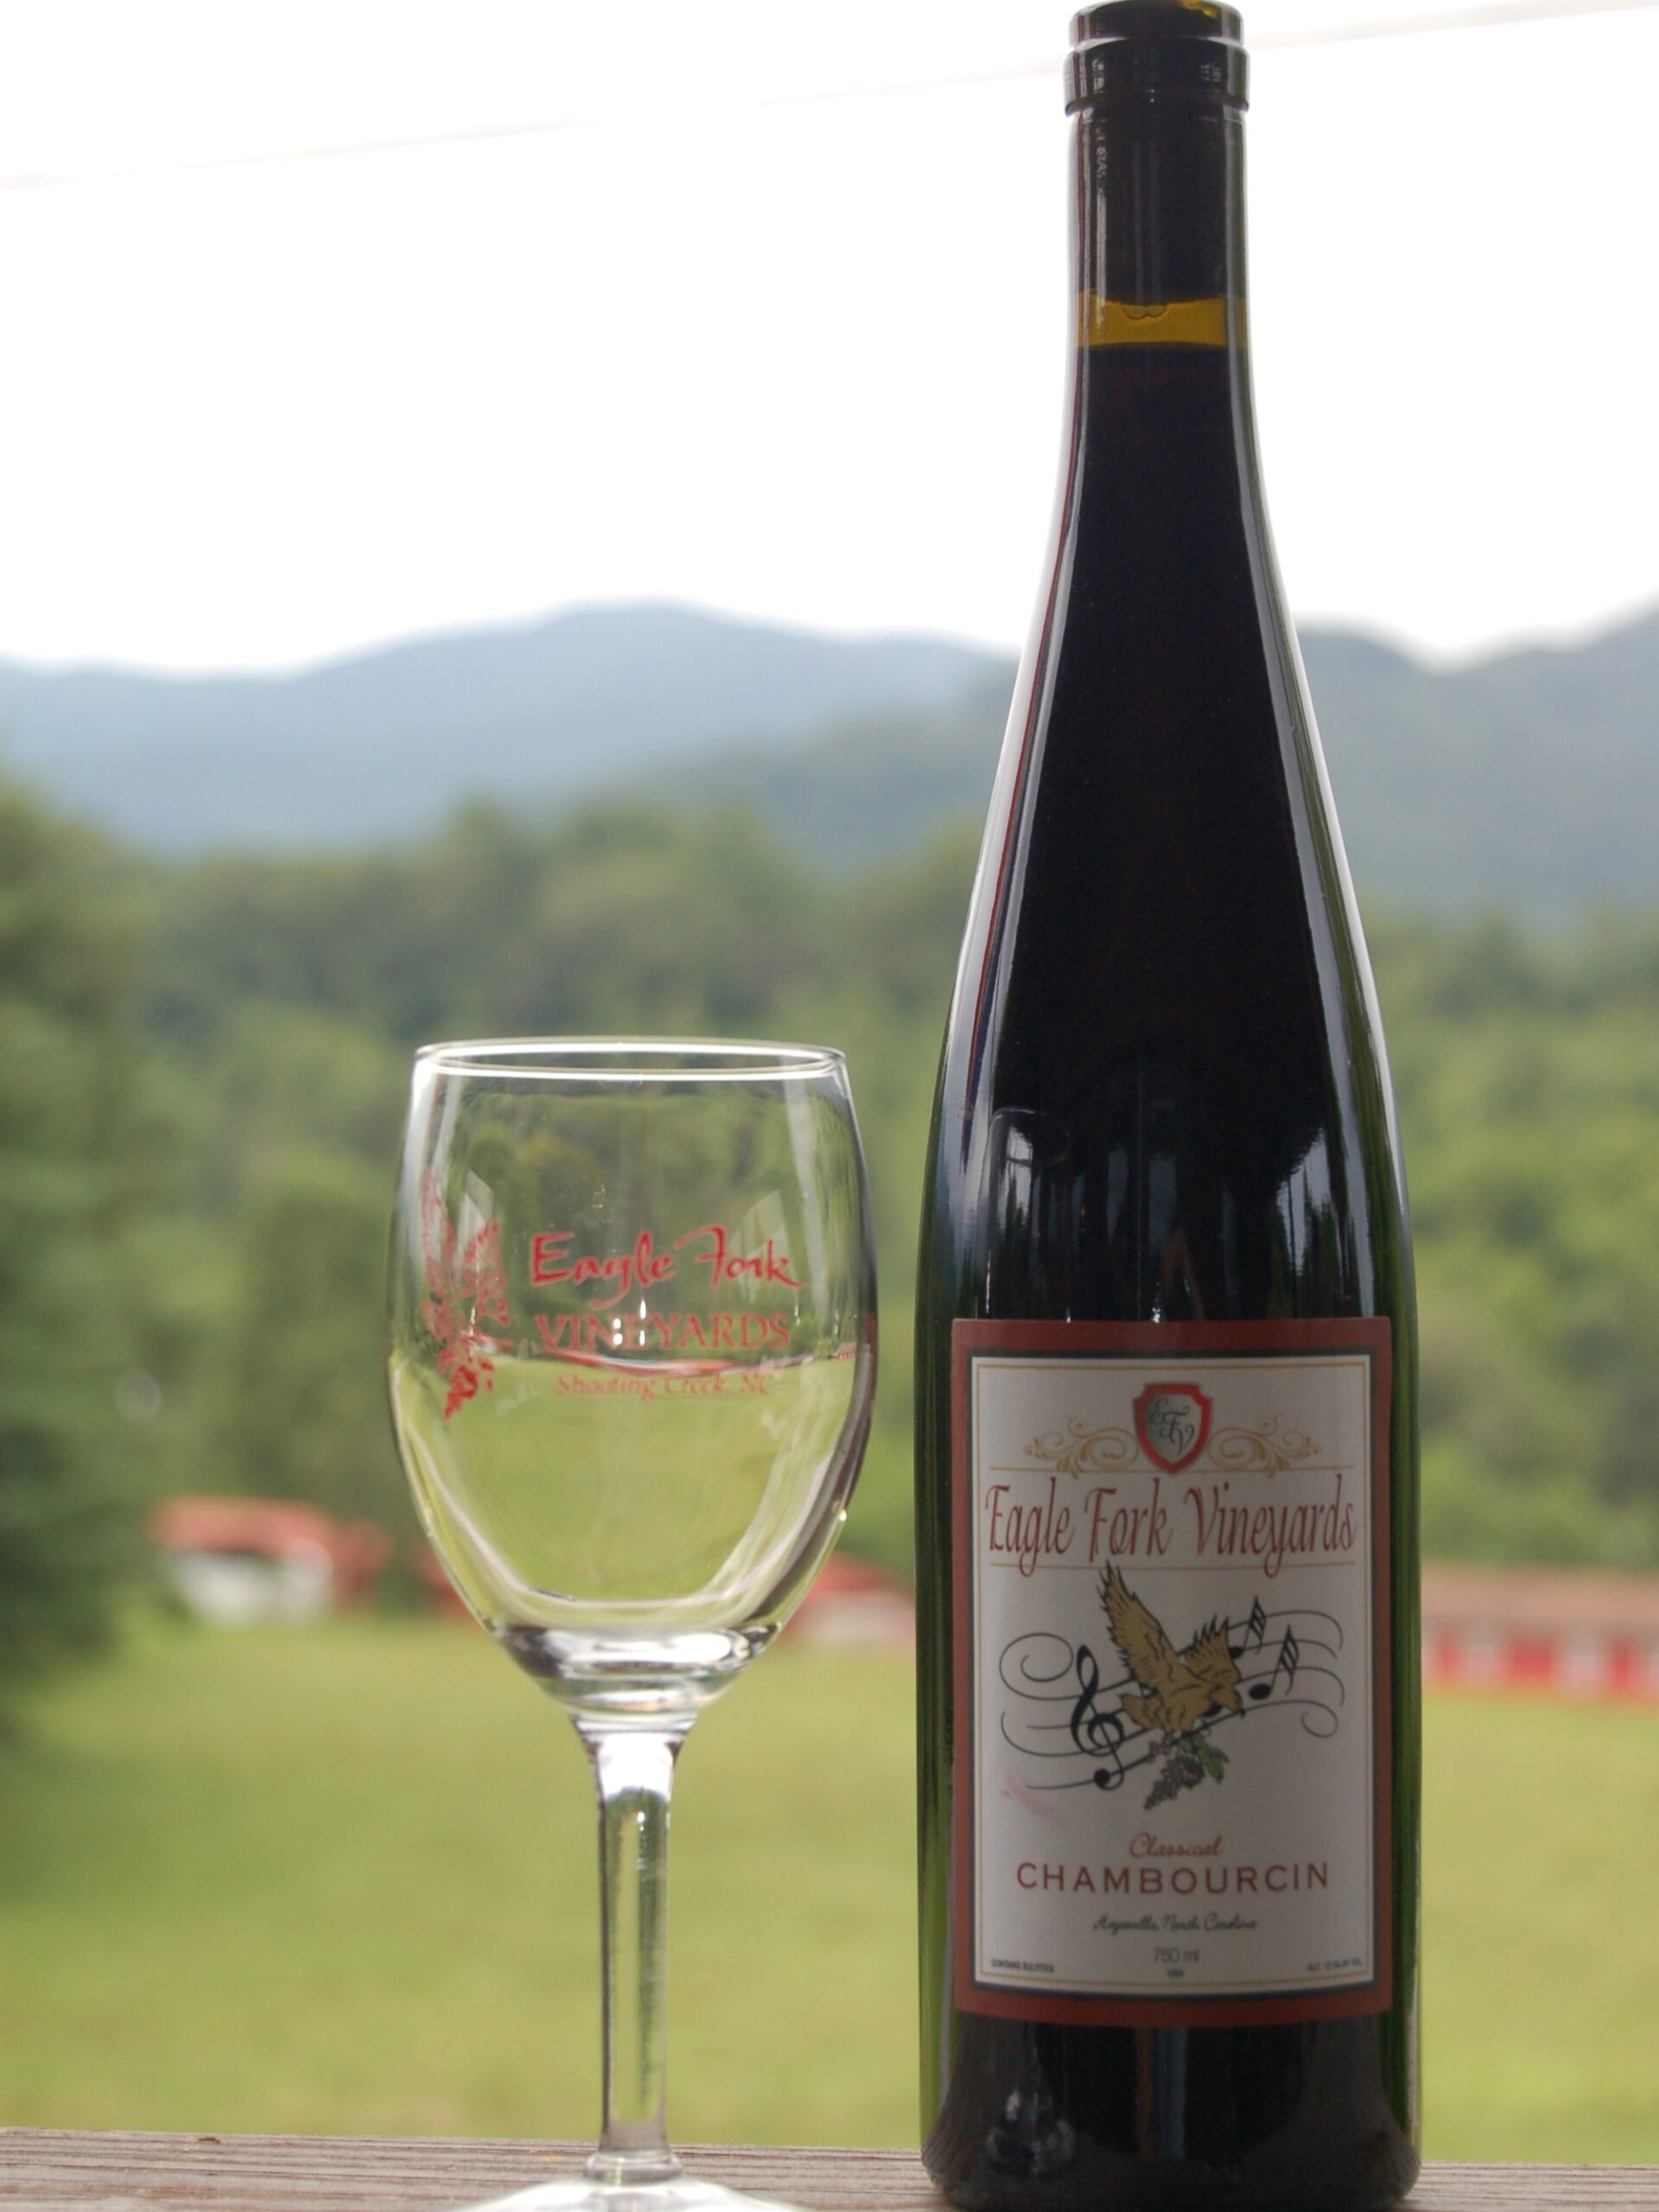 The delightful taste of our fine Chambourcin wine aged in a bourbon soaked barrel. Taste the dark cherry and vanilla flavors highlighted by caramel overtones of the bourbon.